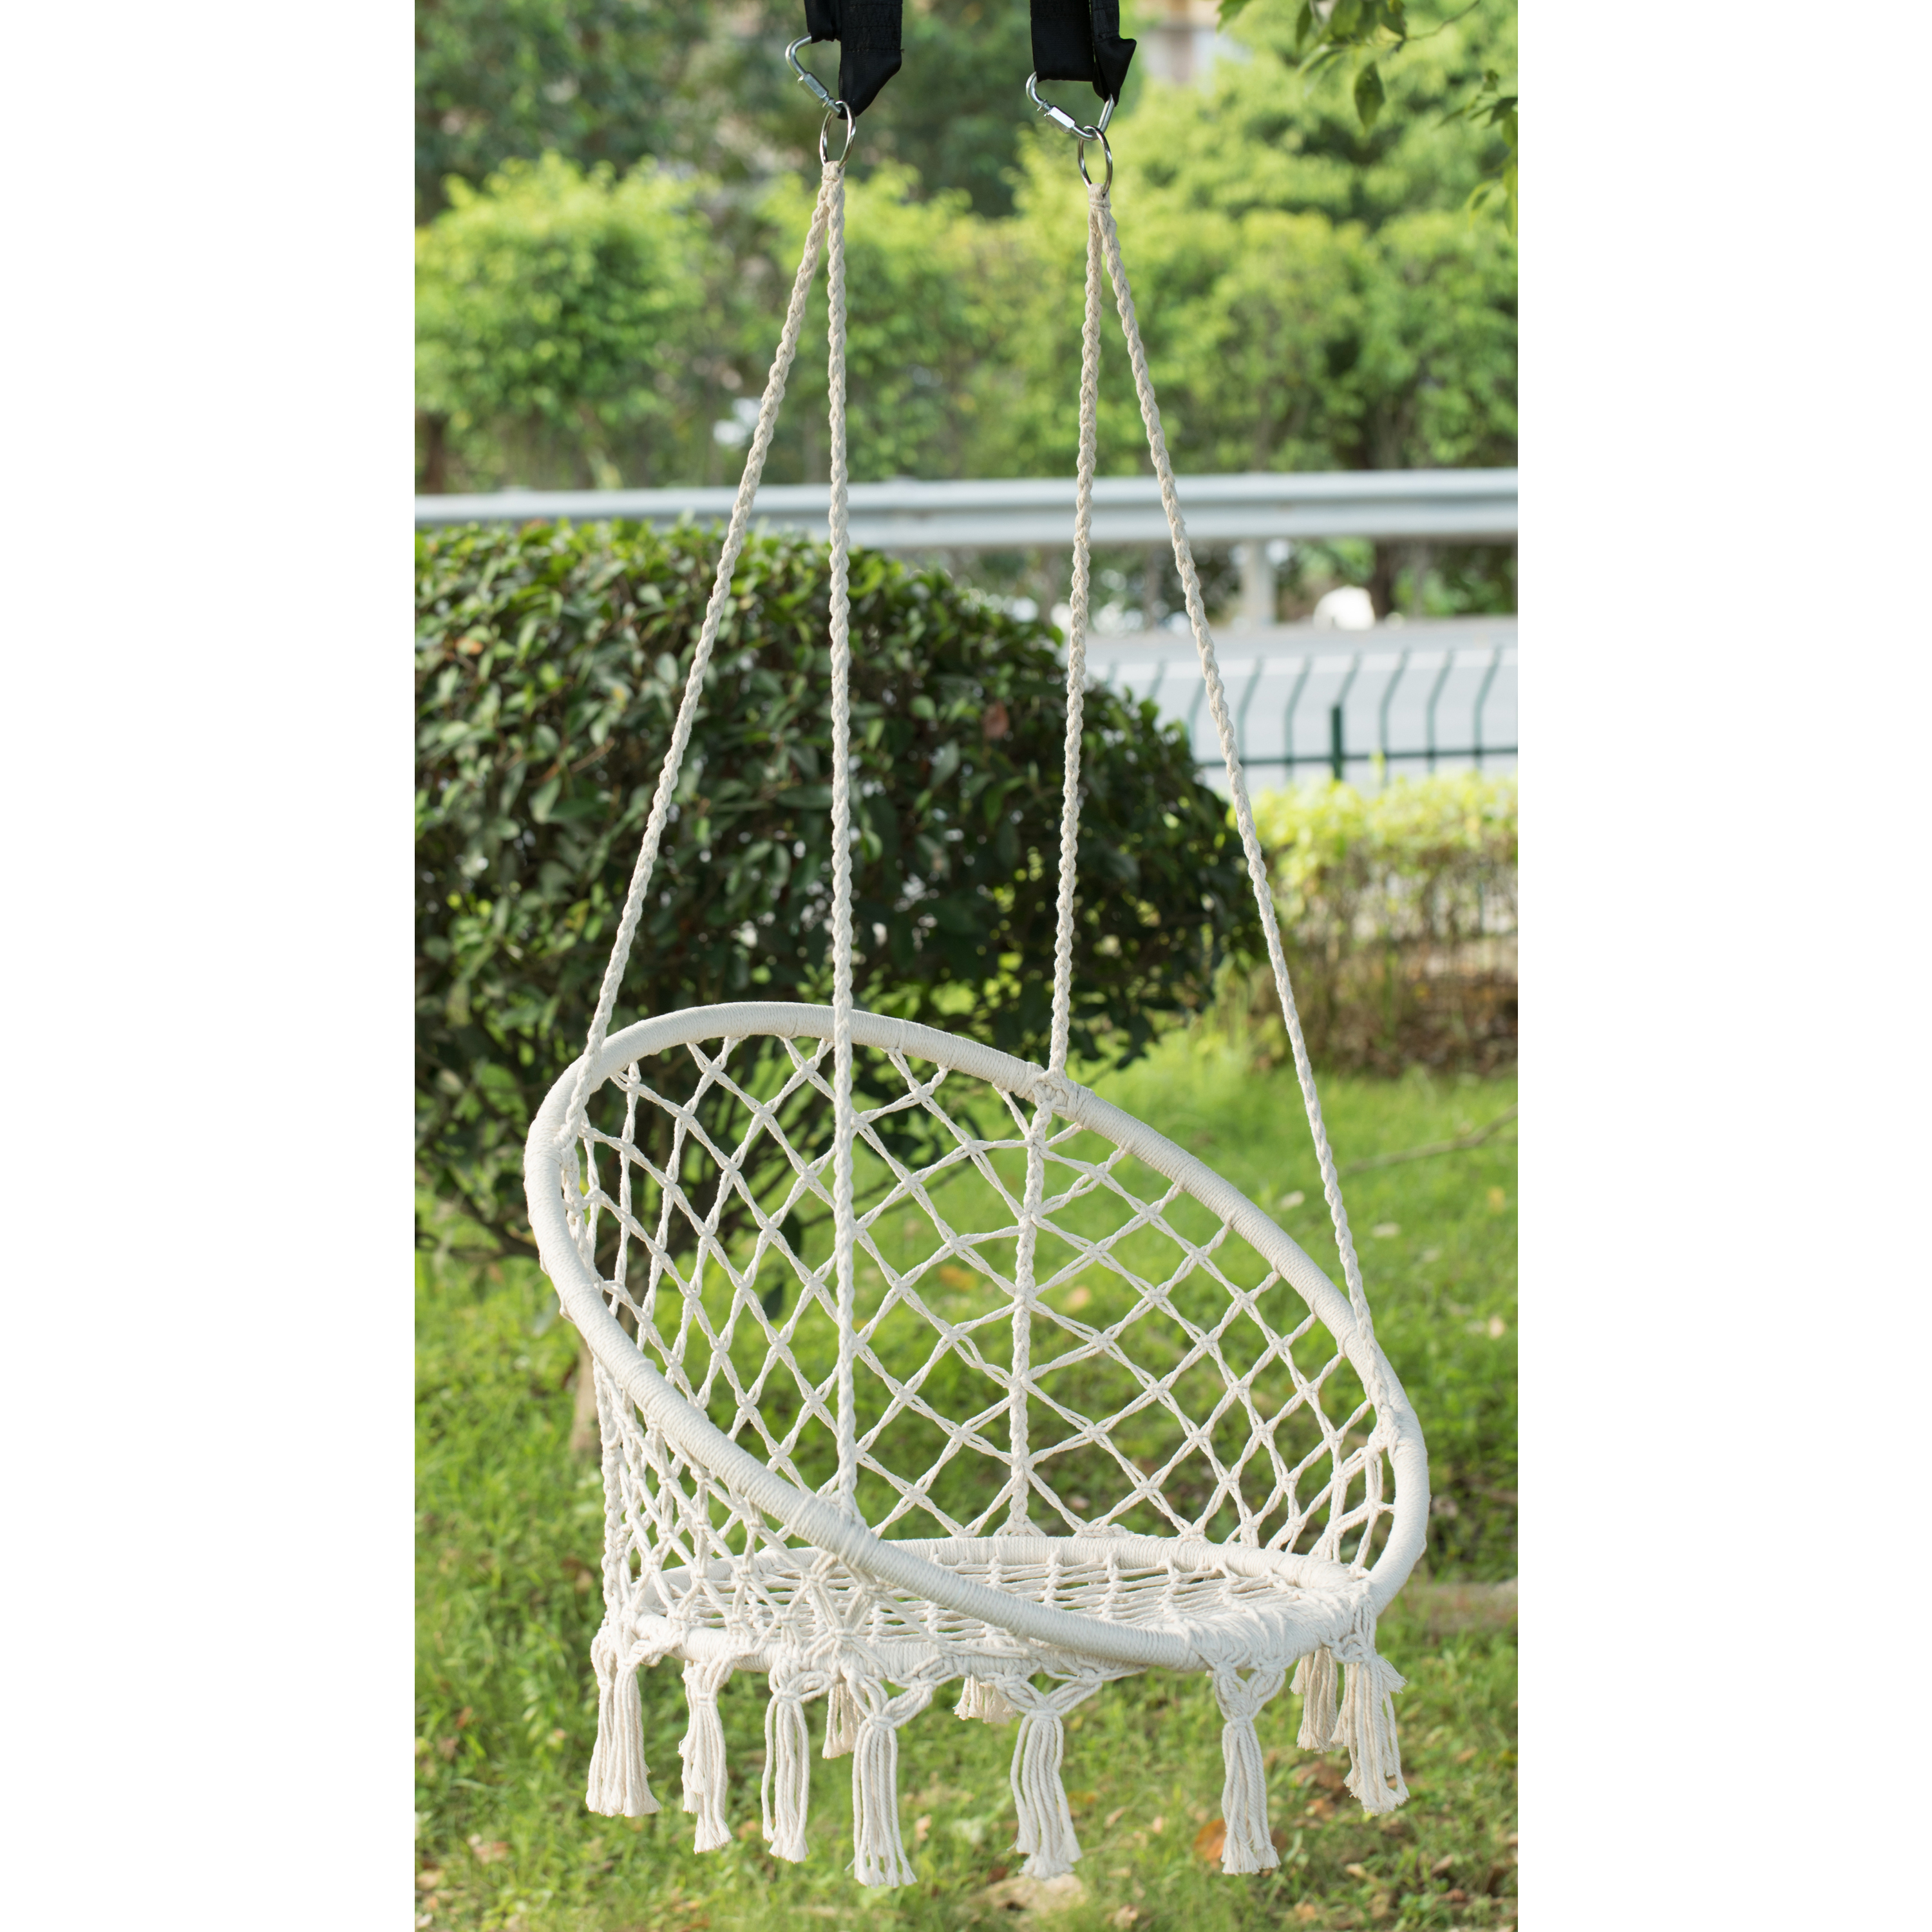 Round Hanging Hammock Cotton Rope Macrame Swing Chair For Indoor And Outdoor